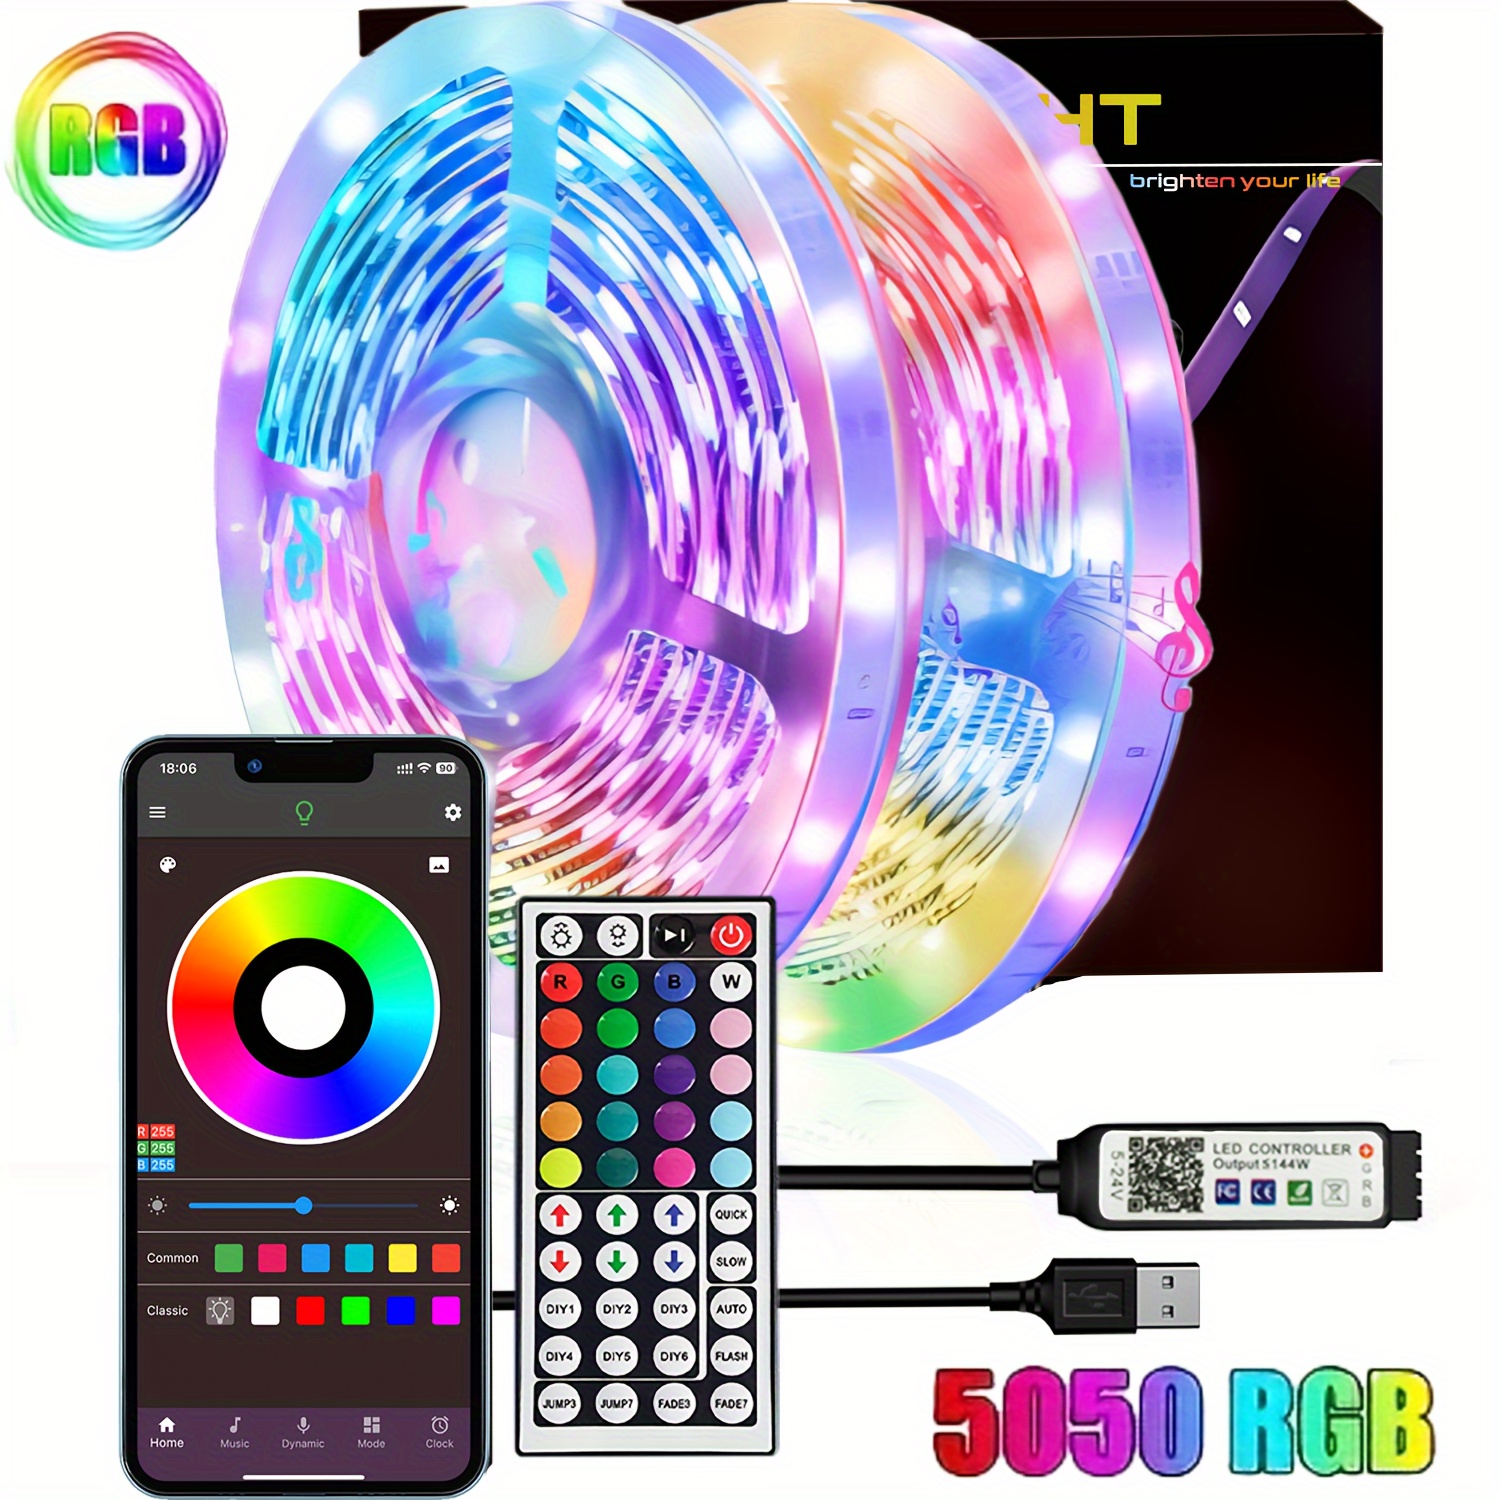 

3/16/32/50/65/100ft Led Lights For Bedroom, Music Sync Color Changing With 44-key Remote And App Control Rgb 5050 Led Strip Lights, For Wedding Birthday Festival Party Decorations